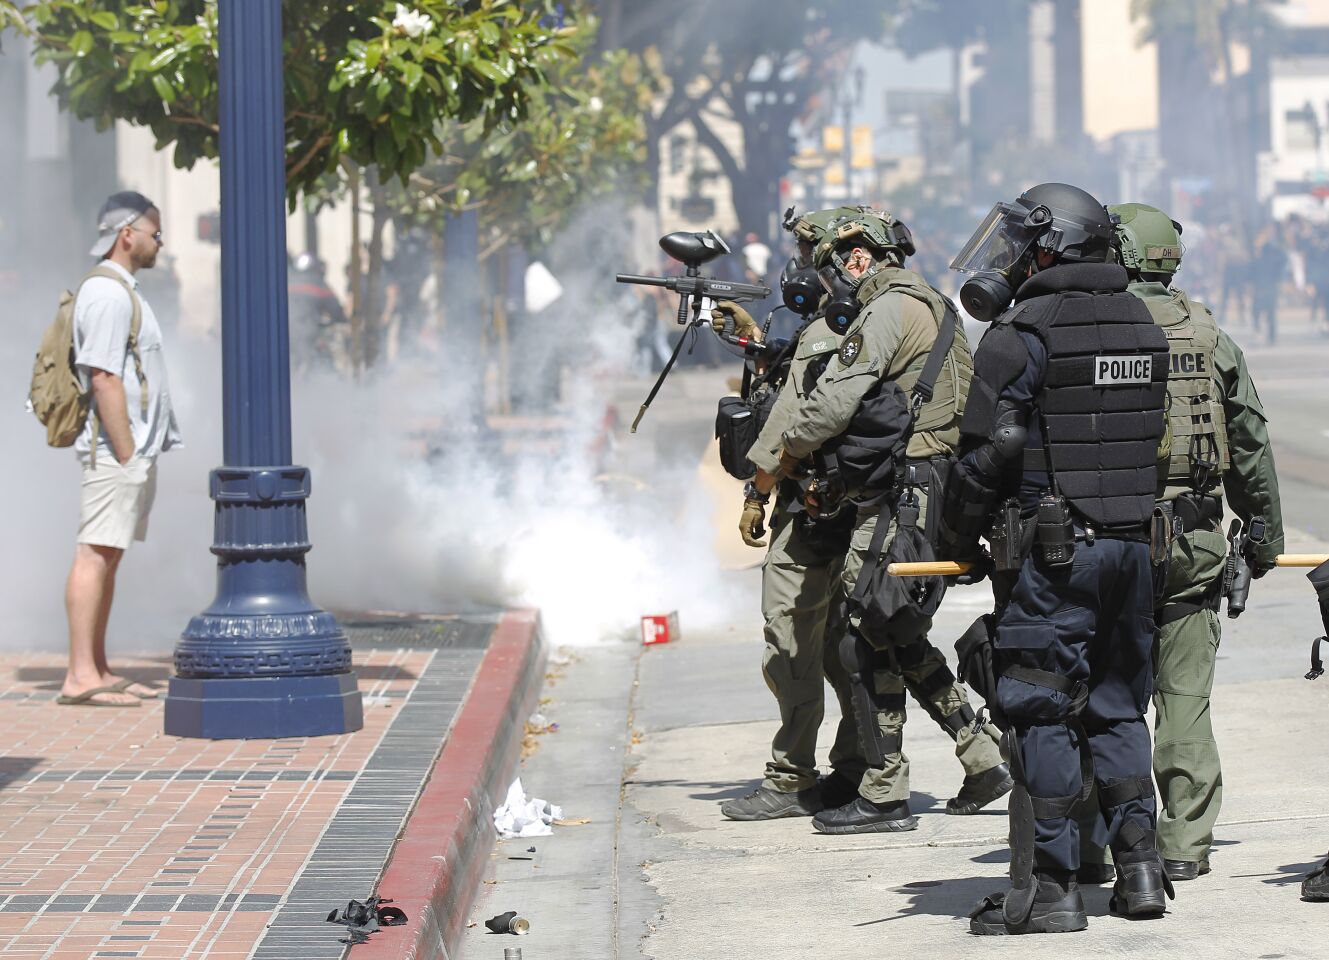 San Diego police fired rubber bullets, tear gas and flash bangs at protesters near the San Diego Hall of Justice in San Diego on May 31, 2020. The group was protesting the death of George Floyd.